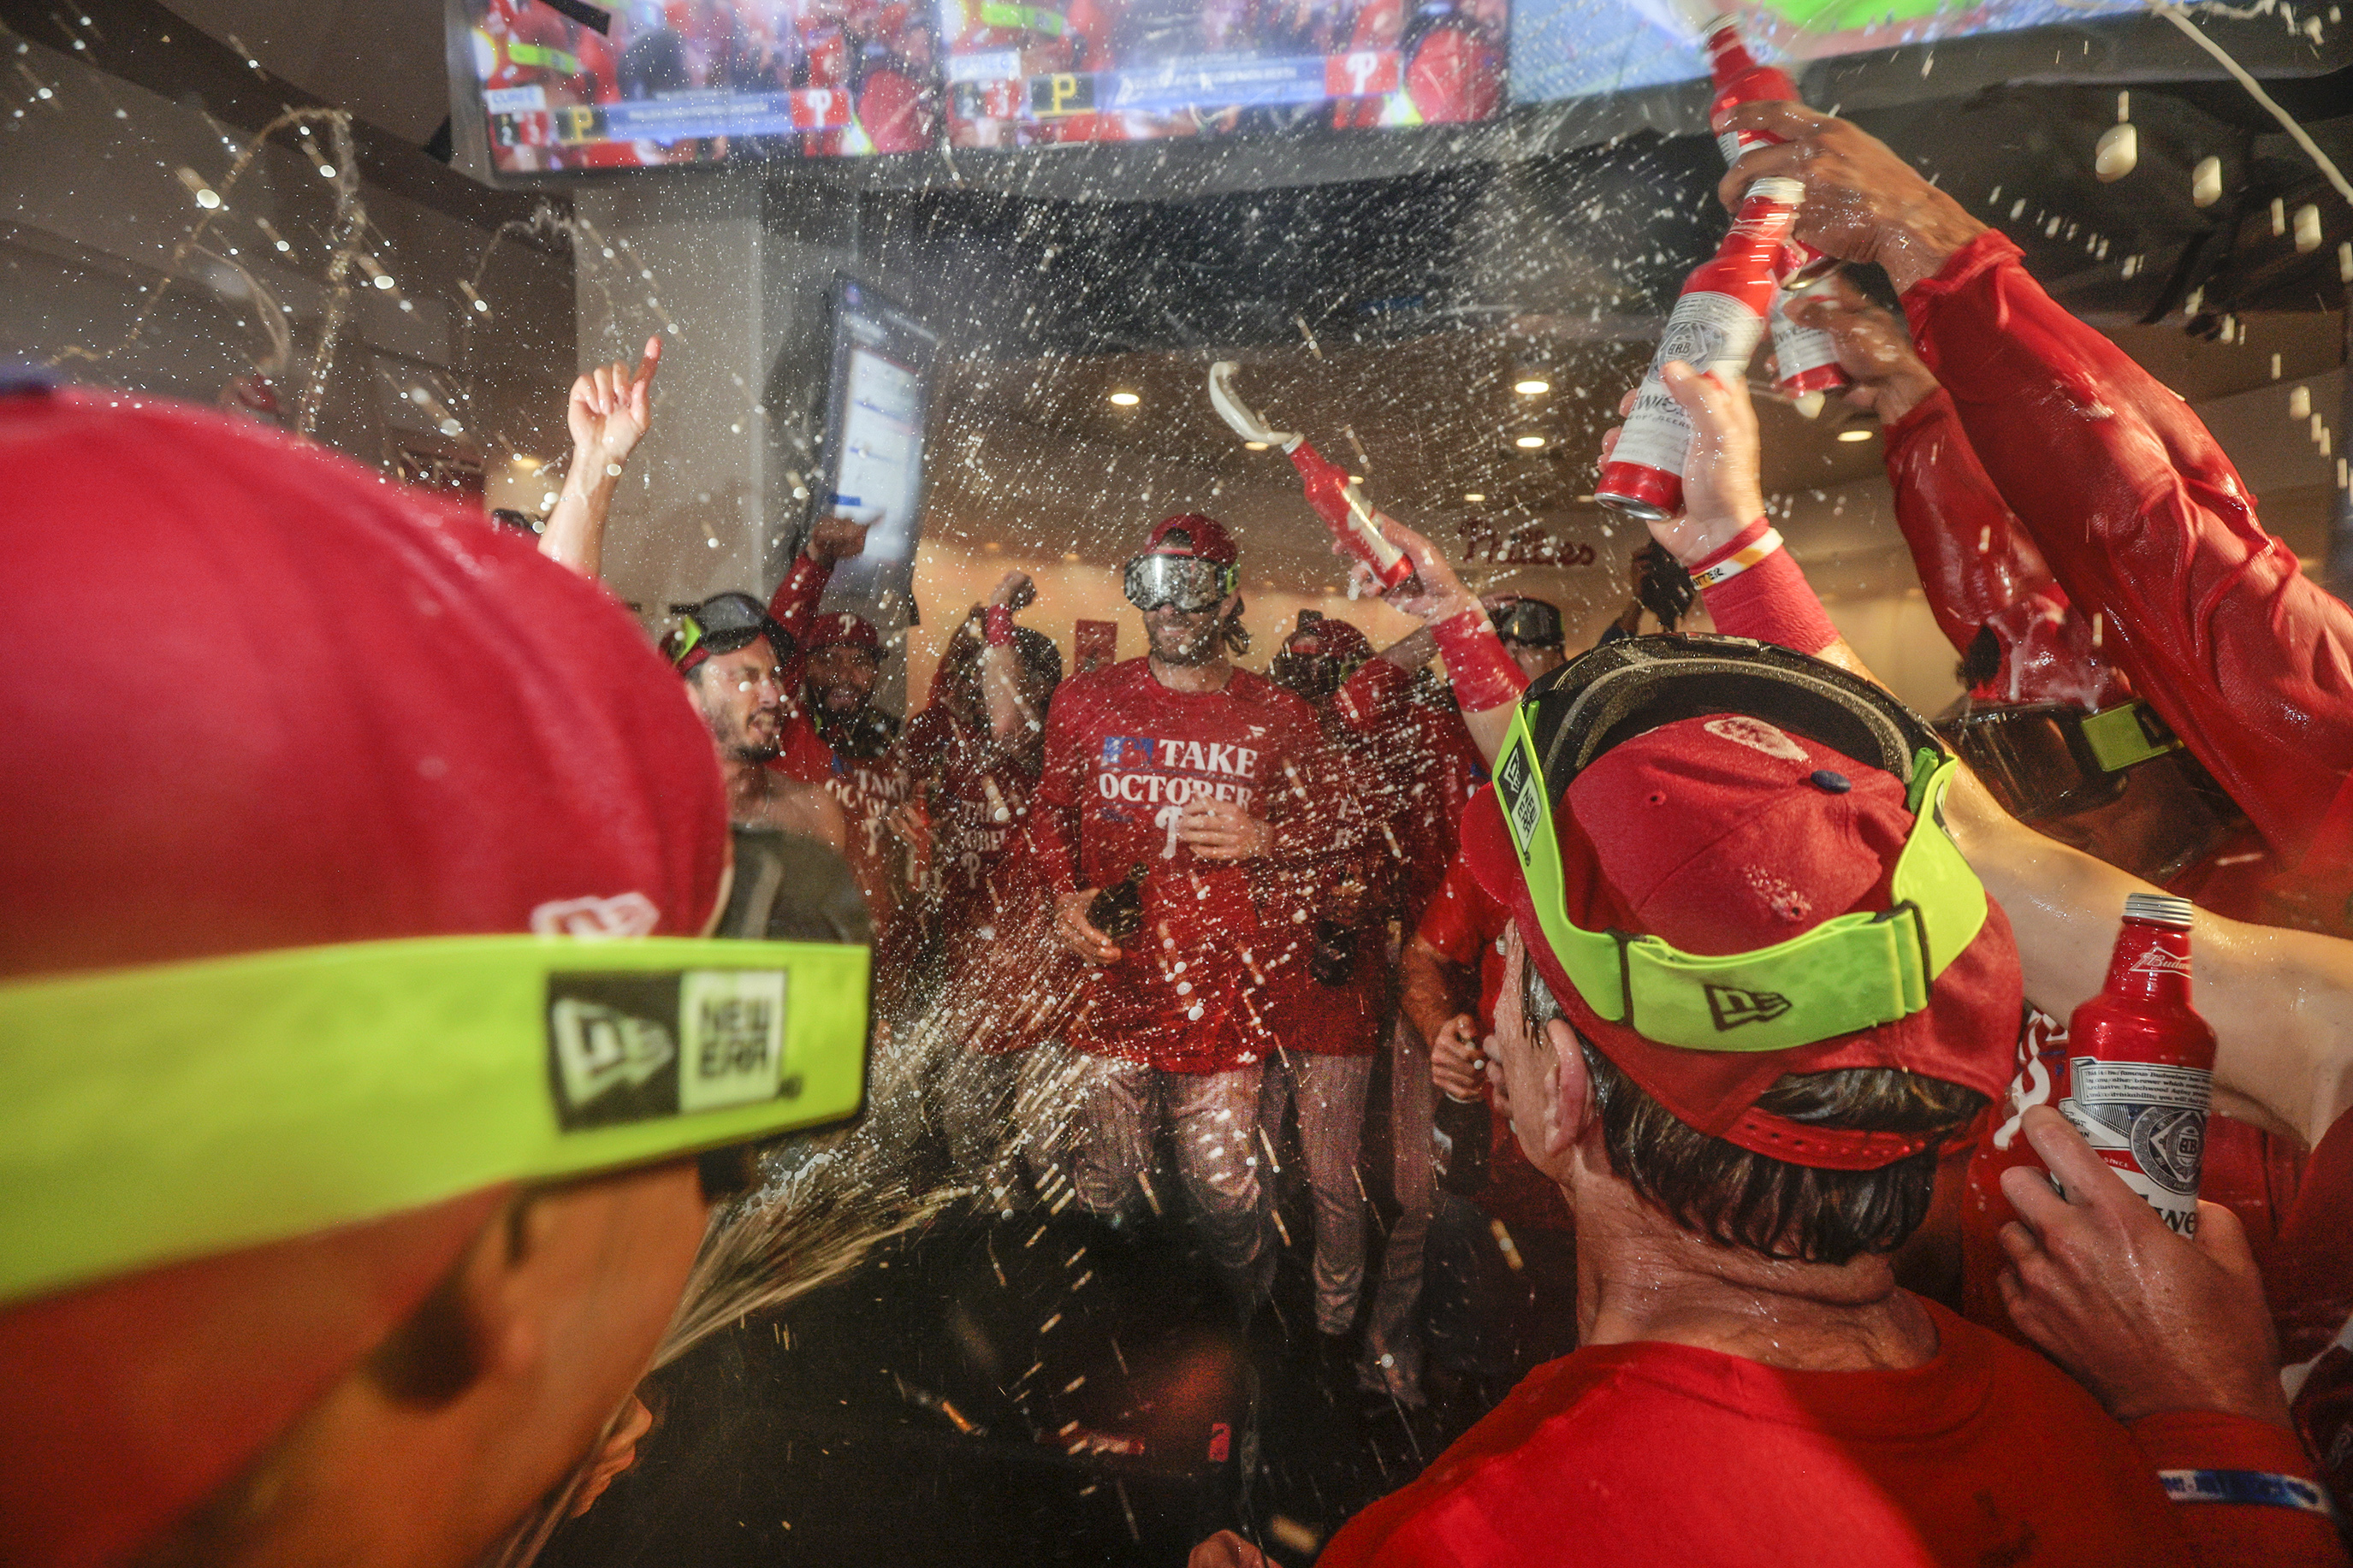 Watch the Phillies' playoff-clinching clubhouse celebration